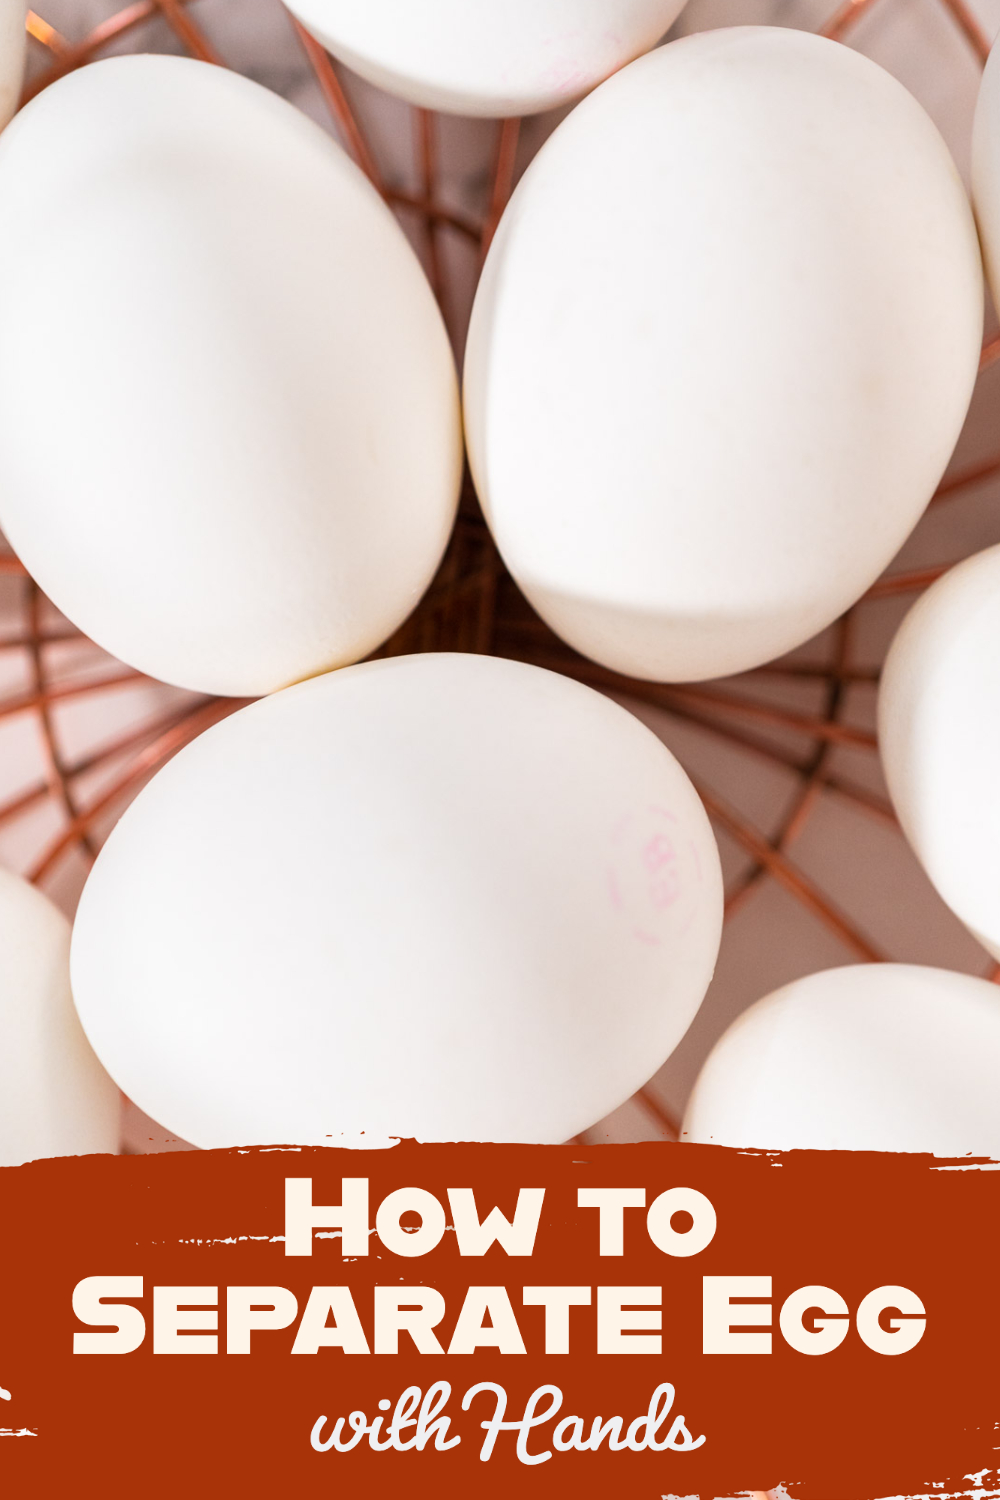 How to Separate Egg with Hands